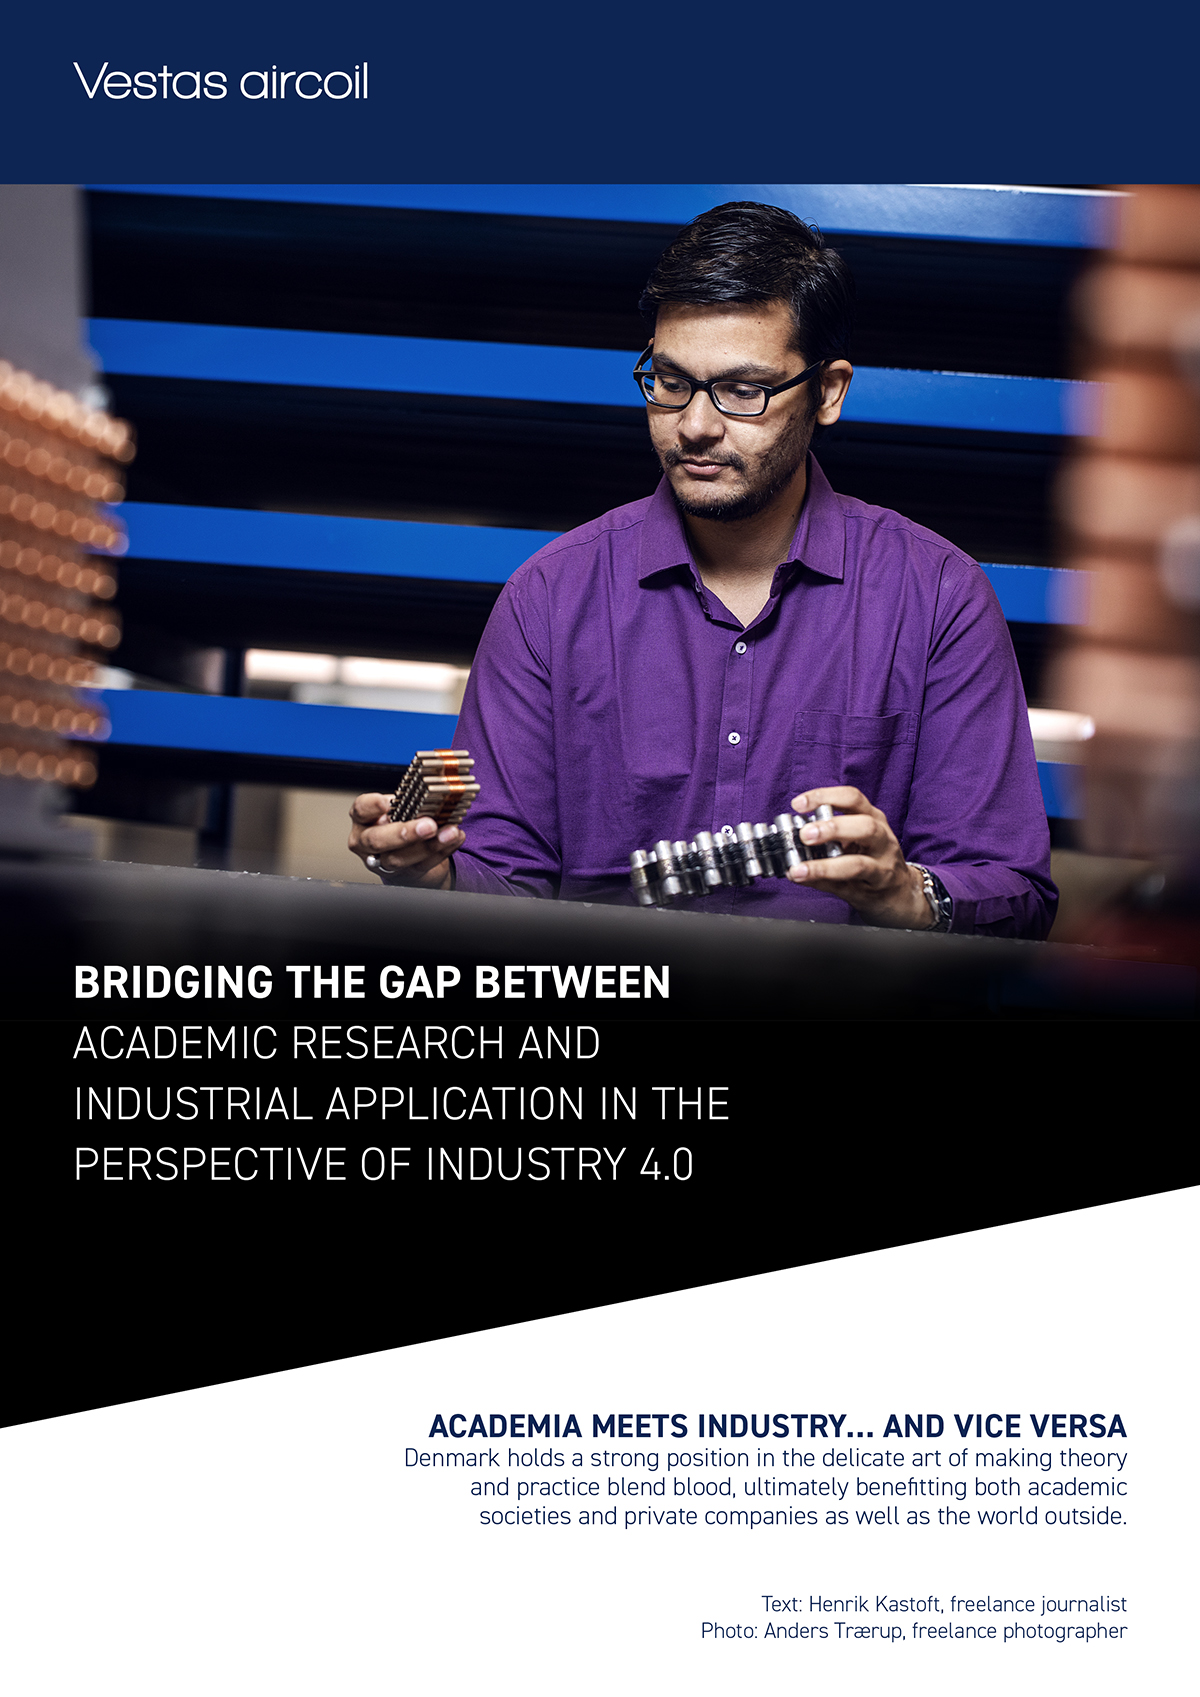 Bridging the gap between academic research and industrial application in the perspective of industry 4.0